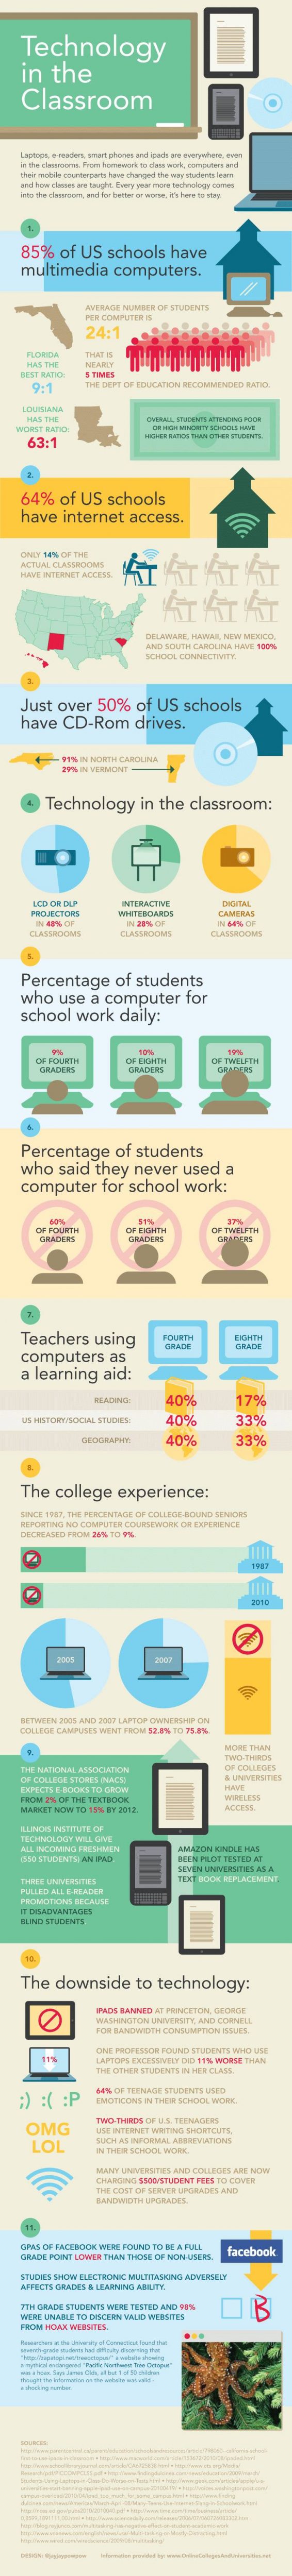 Technology in the Classroom (Infographic)